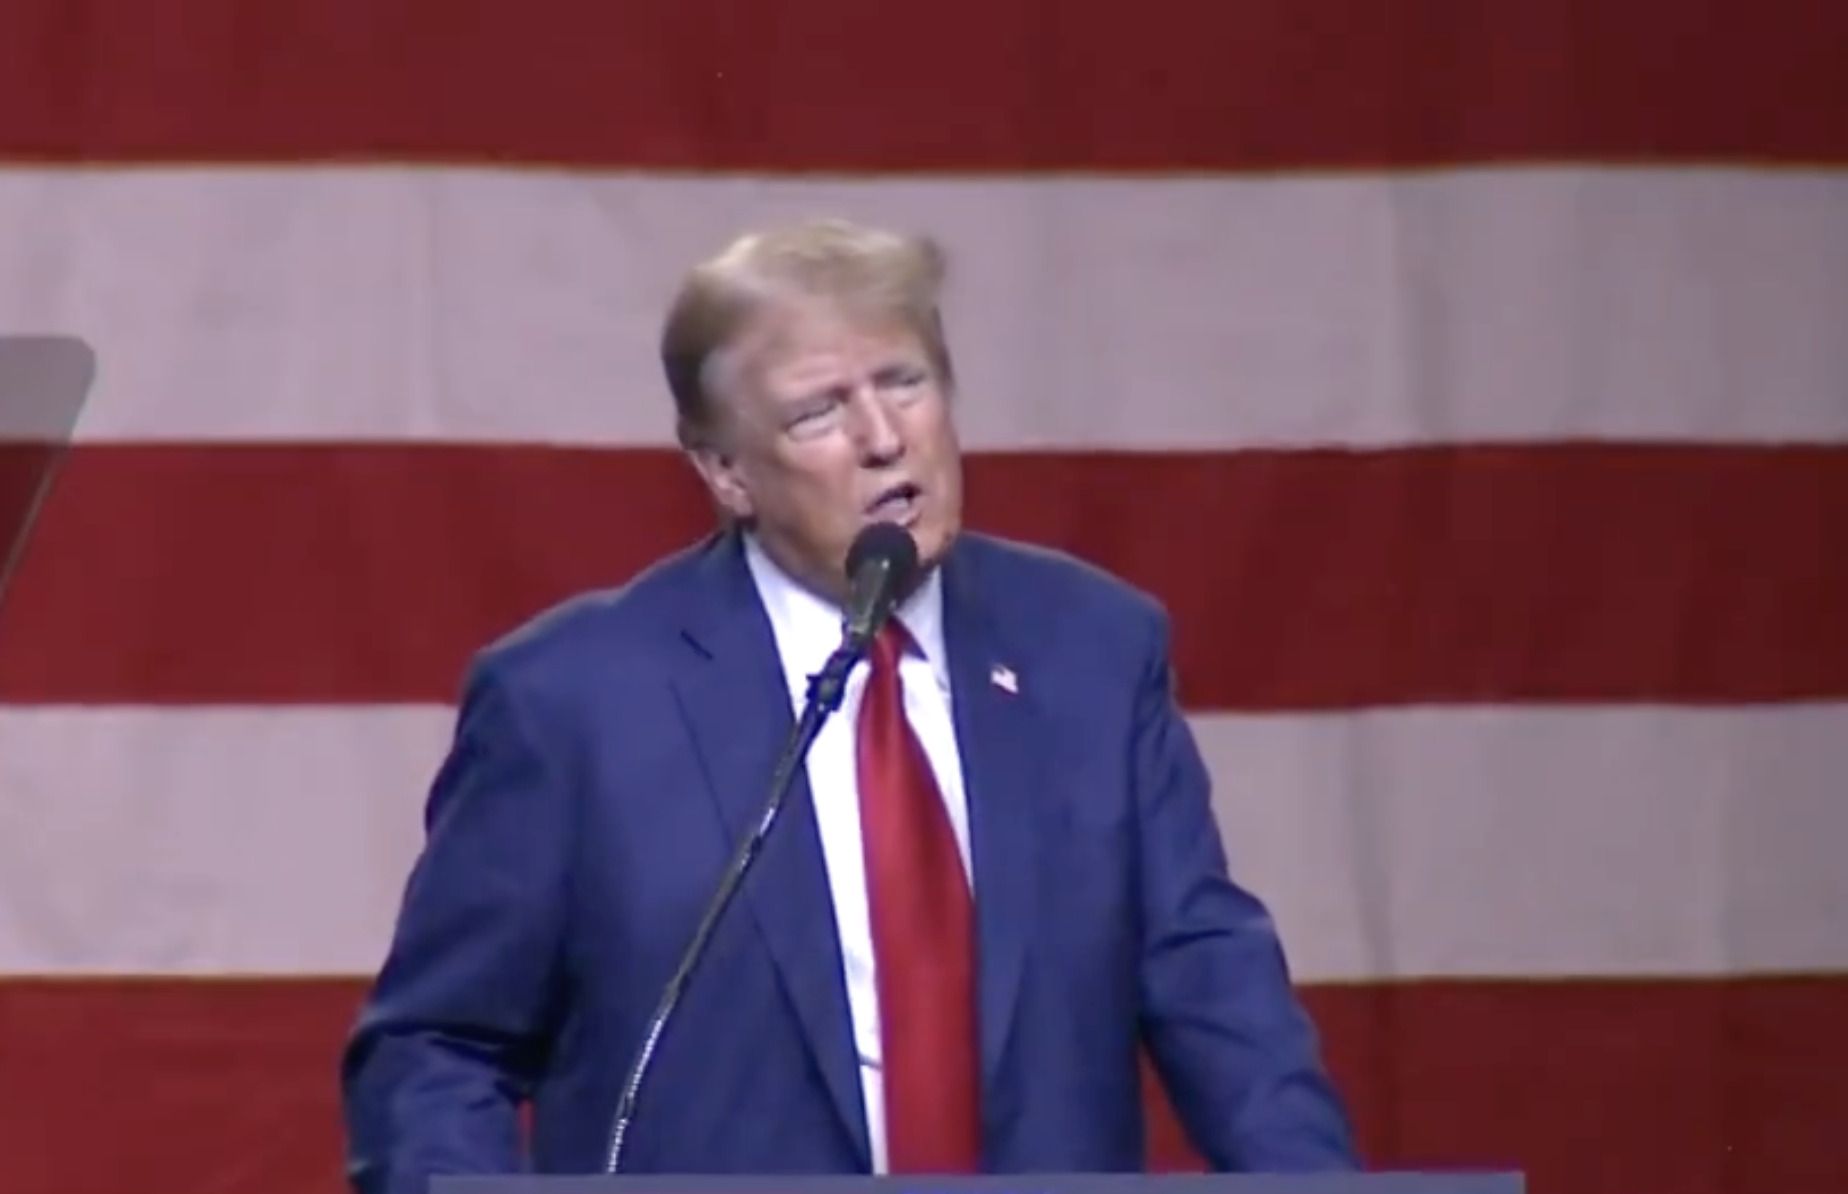 WATCH: President Trump TORCHES Protestor, “Go Home To Your MOM!”